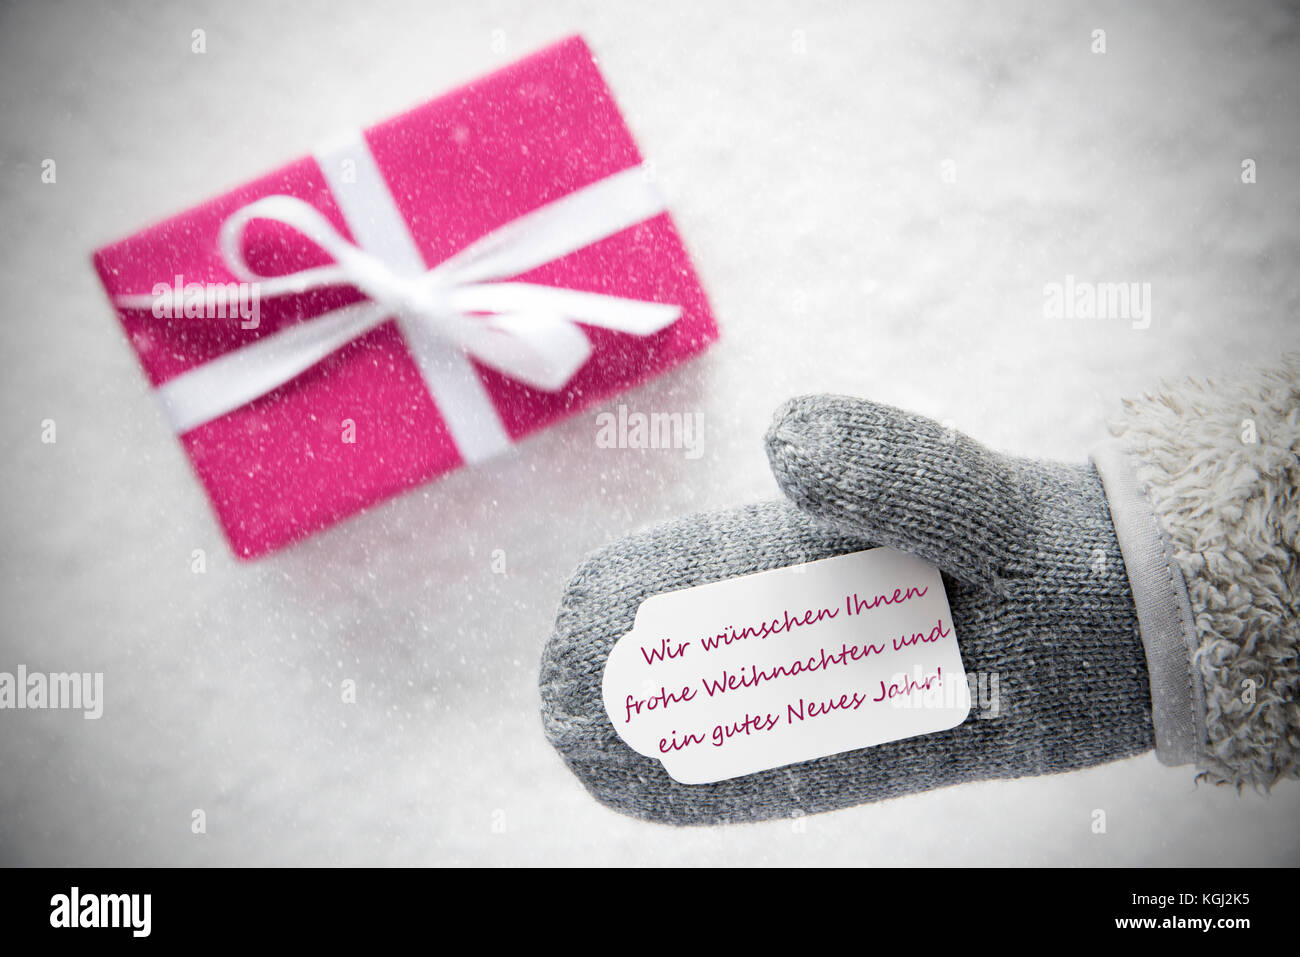 Pink Gift, Glove, Gutes Neues Jahr Means Happy New Year, Snowflakes Stock Photo